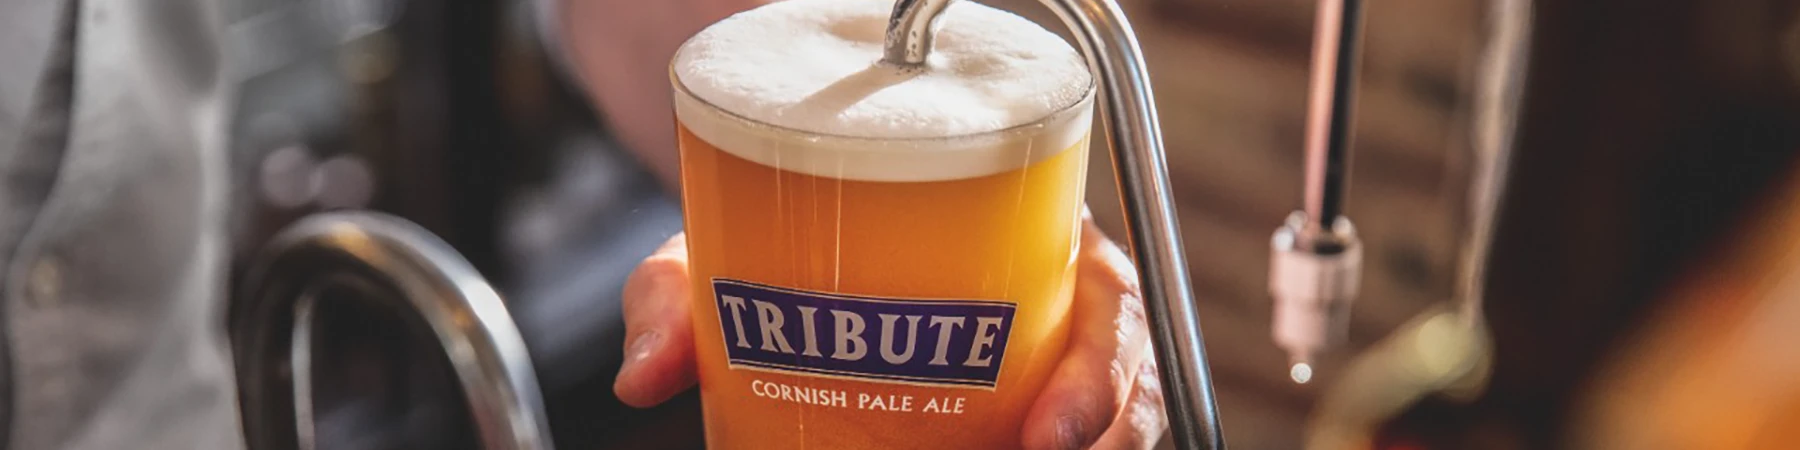 pint of st Austell tribute being poured from tap